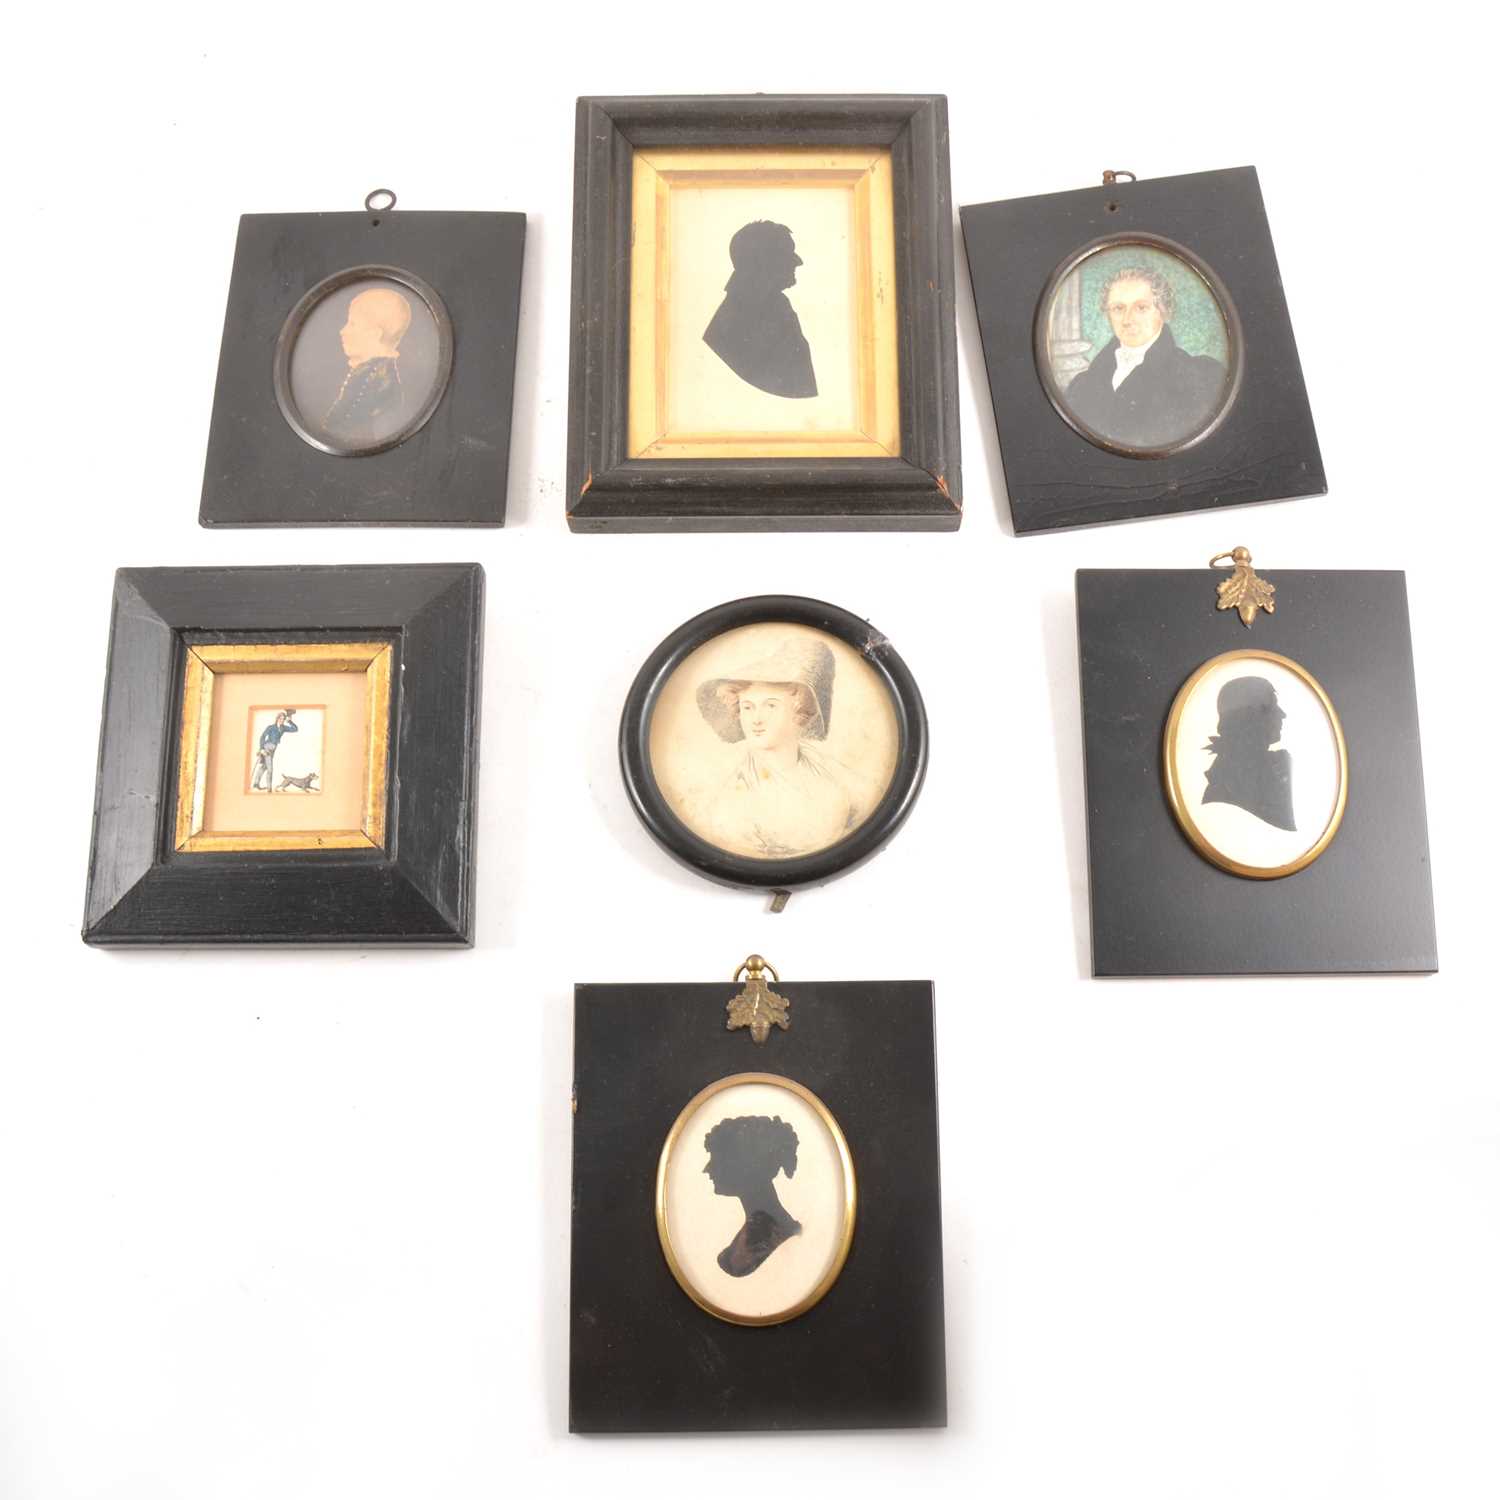 Lot 107 - A Victorian silhouette of a gentleman in profile, and other modern silhouettes